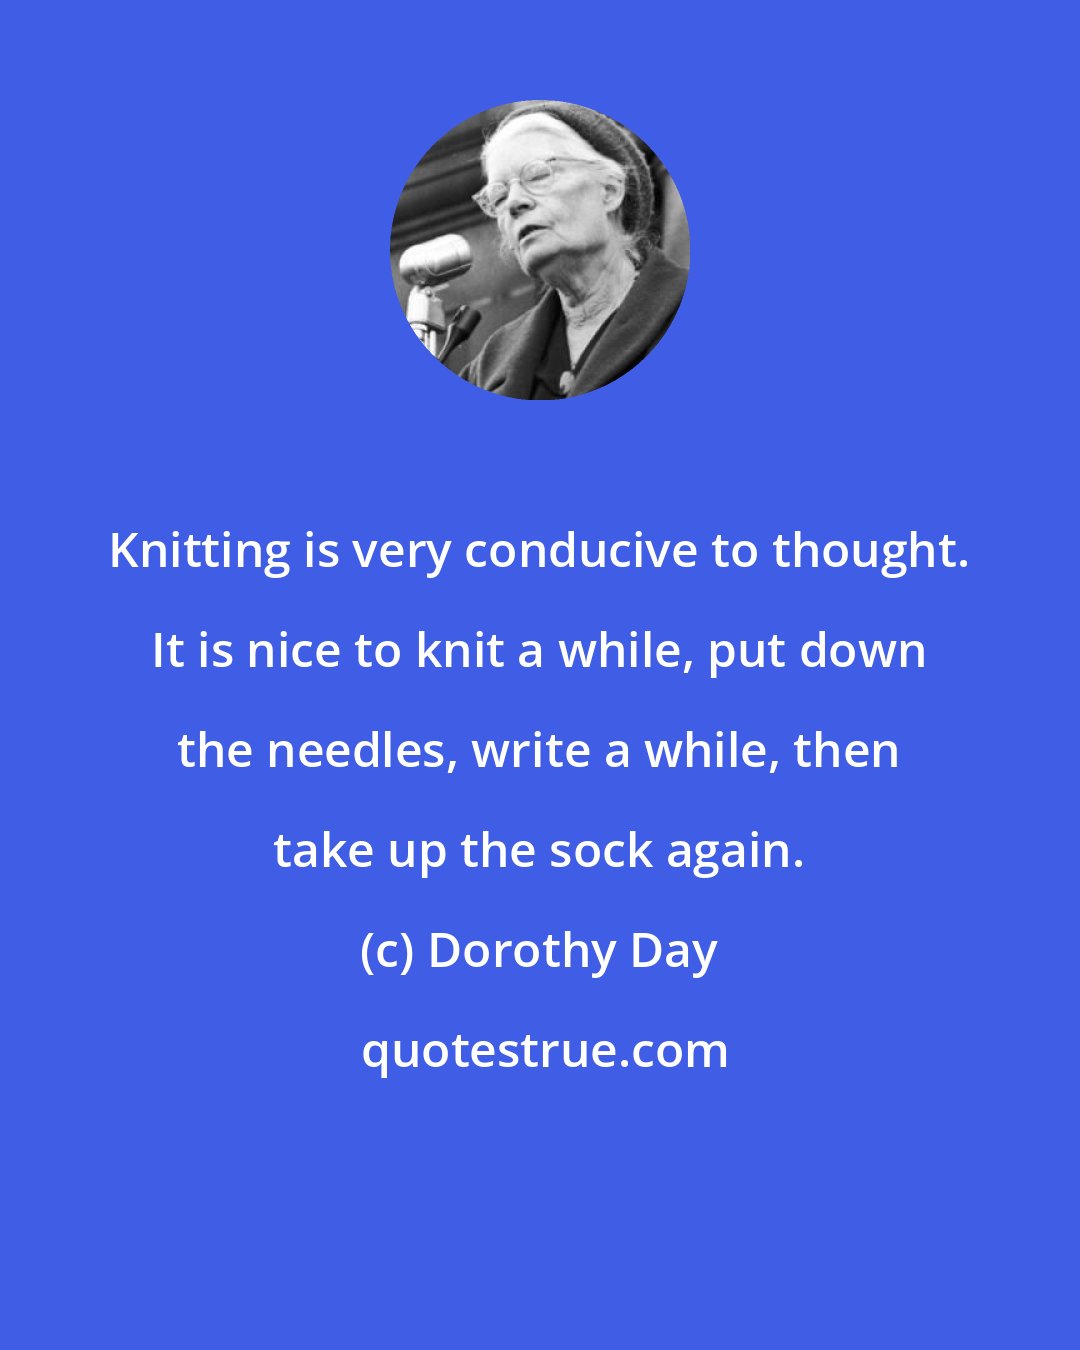 Dorothy Day: Knitting is very conducive to thought. It is nice to knit a while, put down the needles, write a while, then take up the sock again.